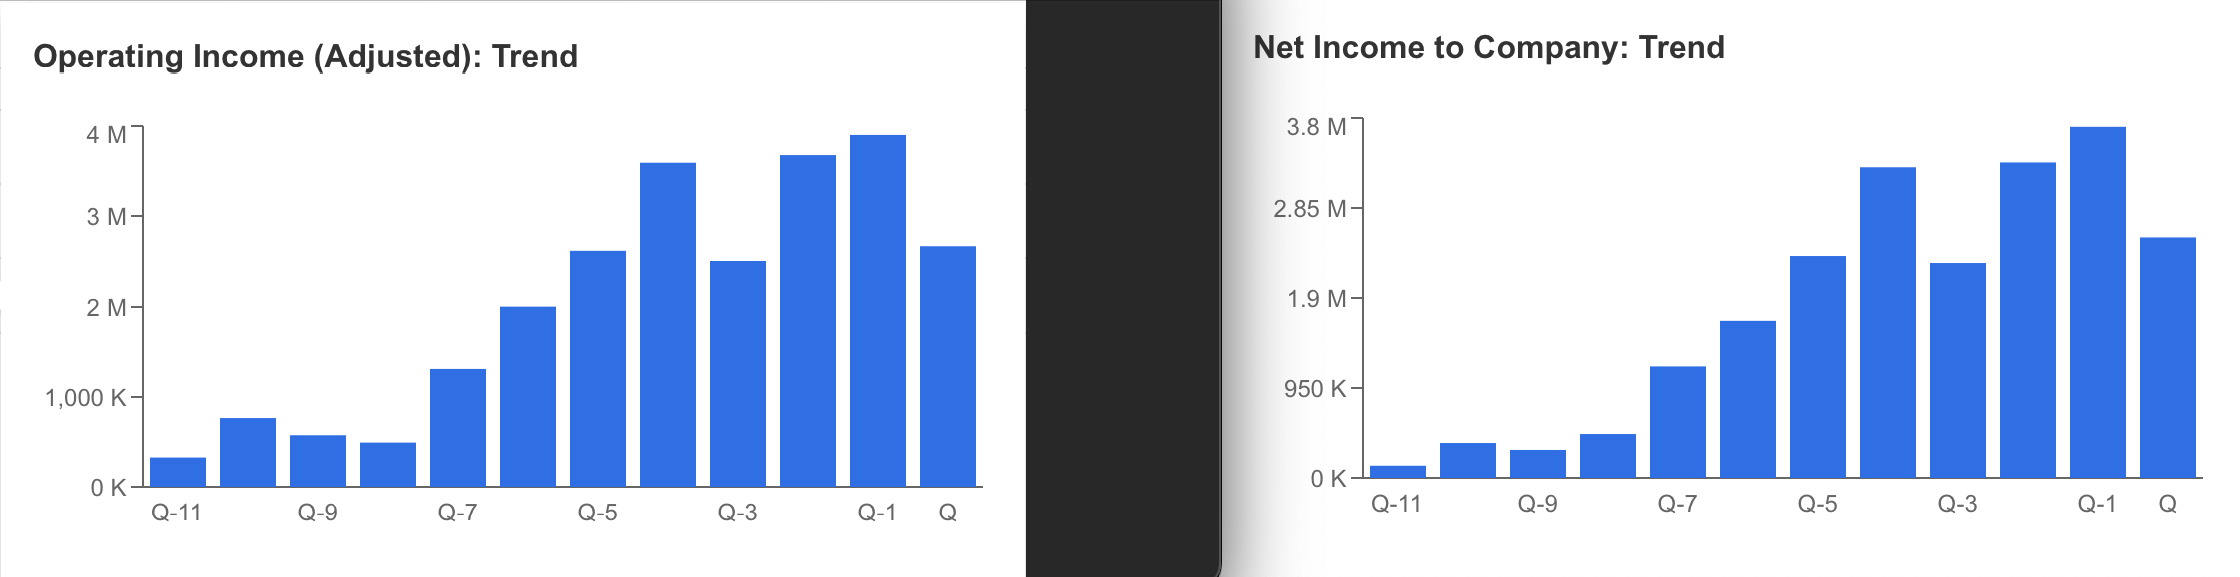 Operating Income and Net Income to Company